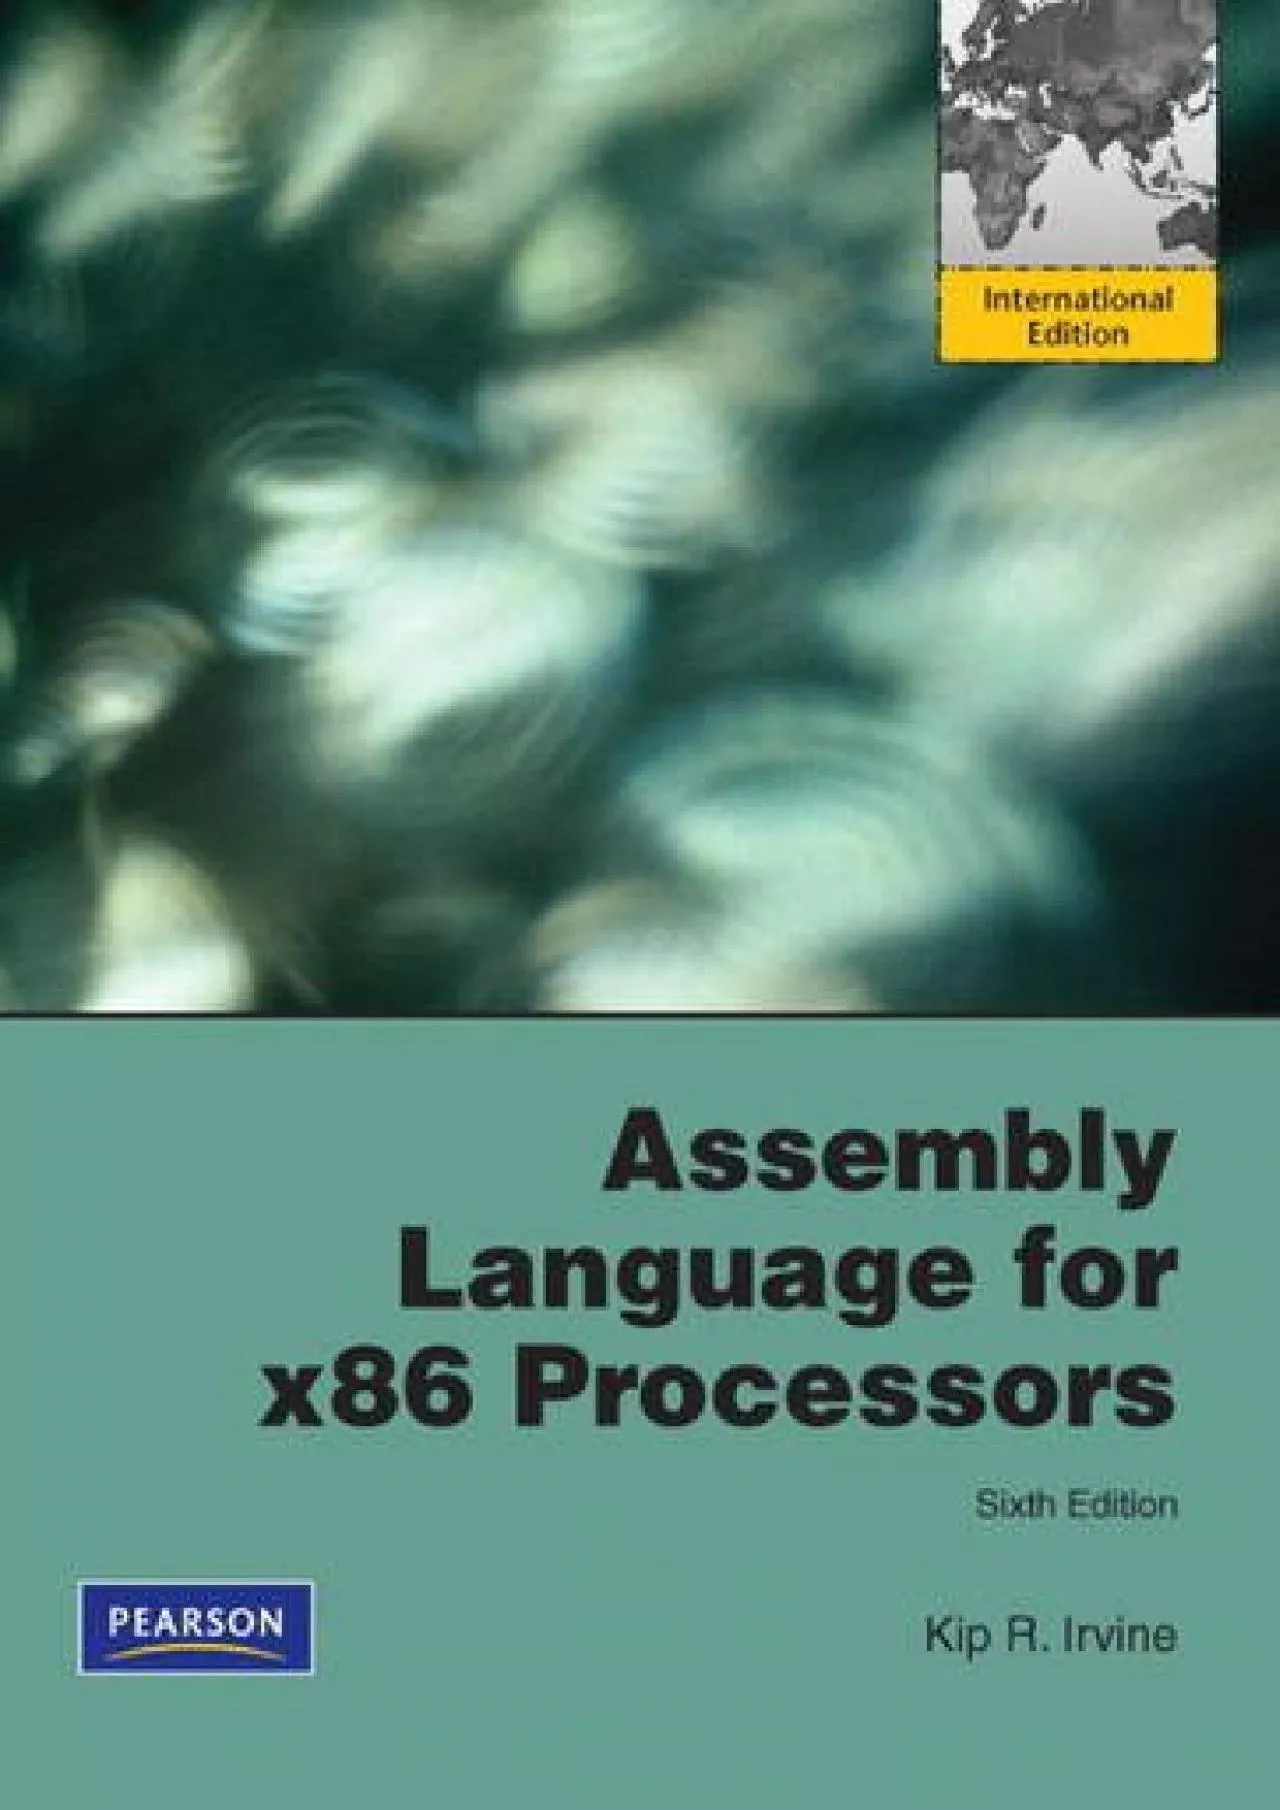 [READ]-Assembly Language for X86 Processors: International Version by Irvine, Kip R. (2010)